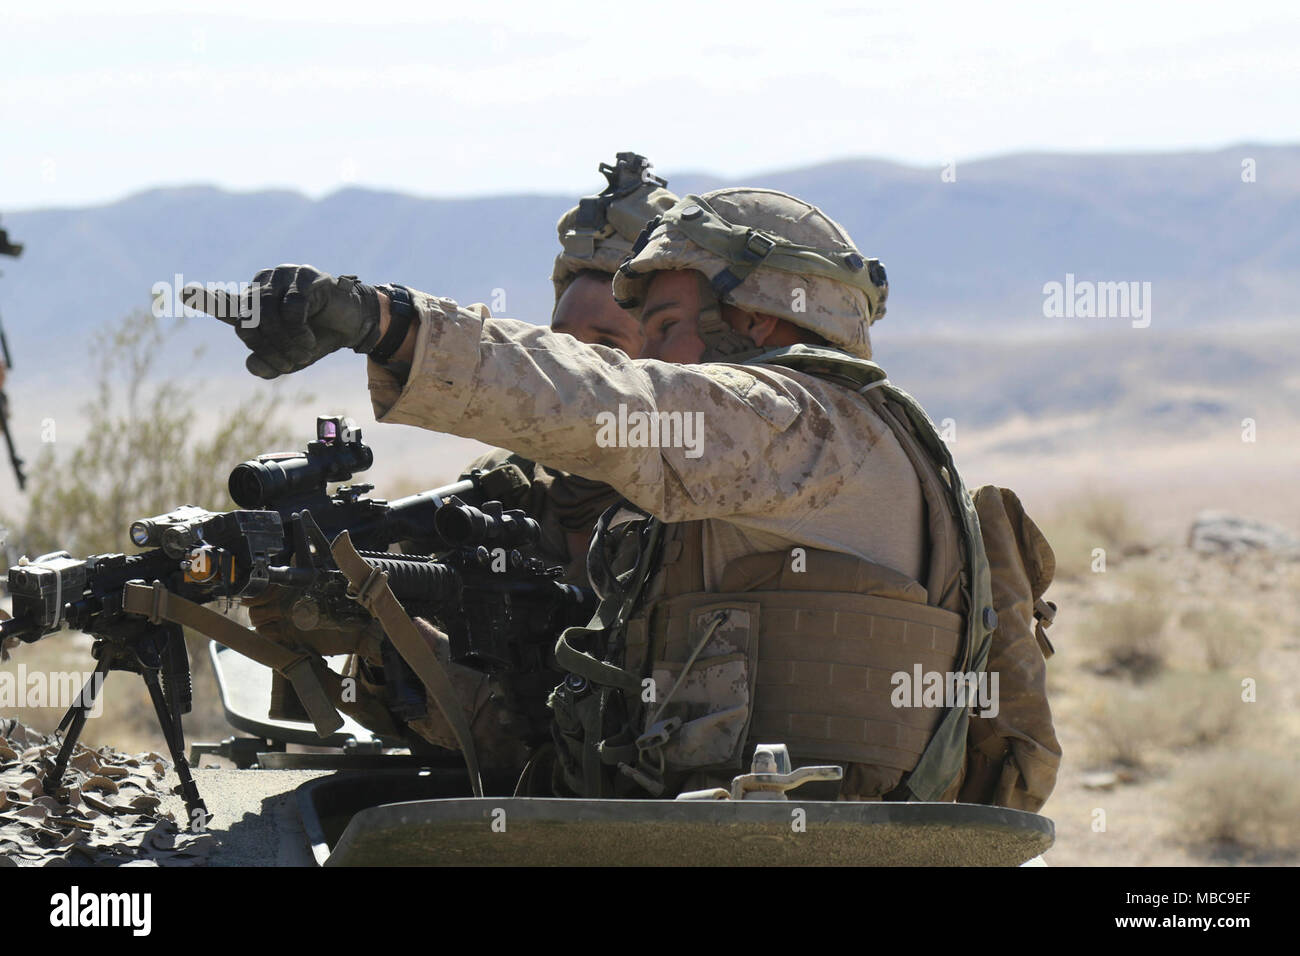 FORT IRWIN, Calif. - U.S. Marines (Guest Blackhorse) from the 2ND Light Armored Reconnaissance Battalion, Camp Lejeune, N.C. defends their position against assaulting elements of the 3rd Cavalry Regiment, from Fort Hood, Texas. Feb. 16, 2018 near the Iron Triangle, National Training Center. This phase of combat challenged the “Brave Rifles” brigade ability to defend key terrain against a near-peer opponent. (U.S. Army Stock Photo